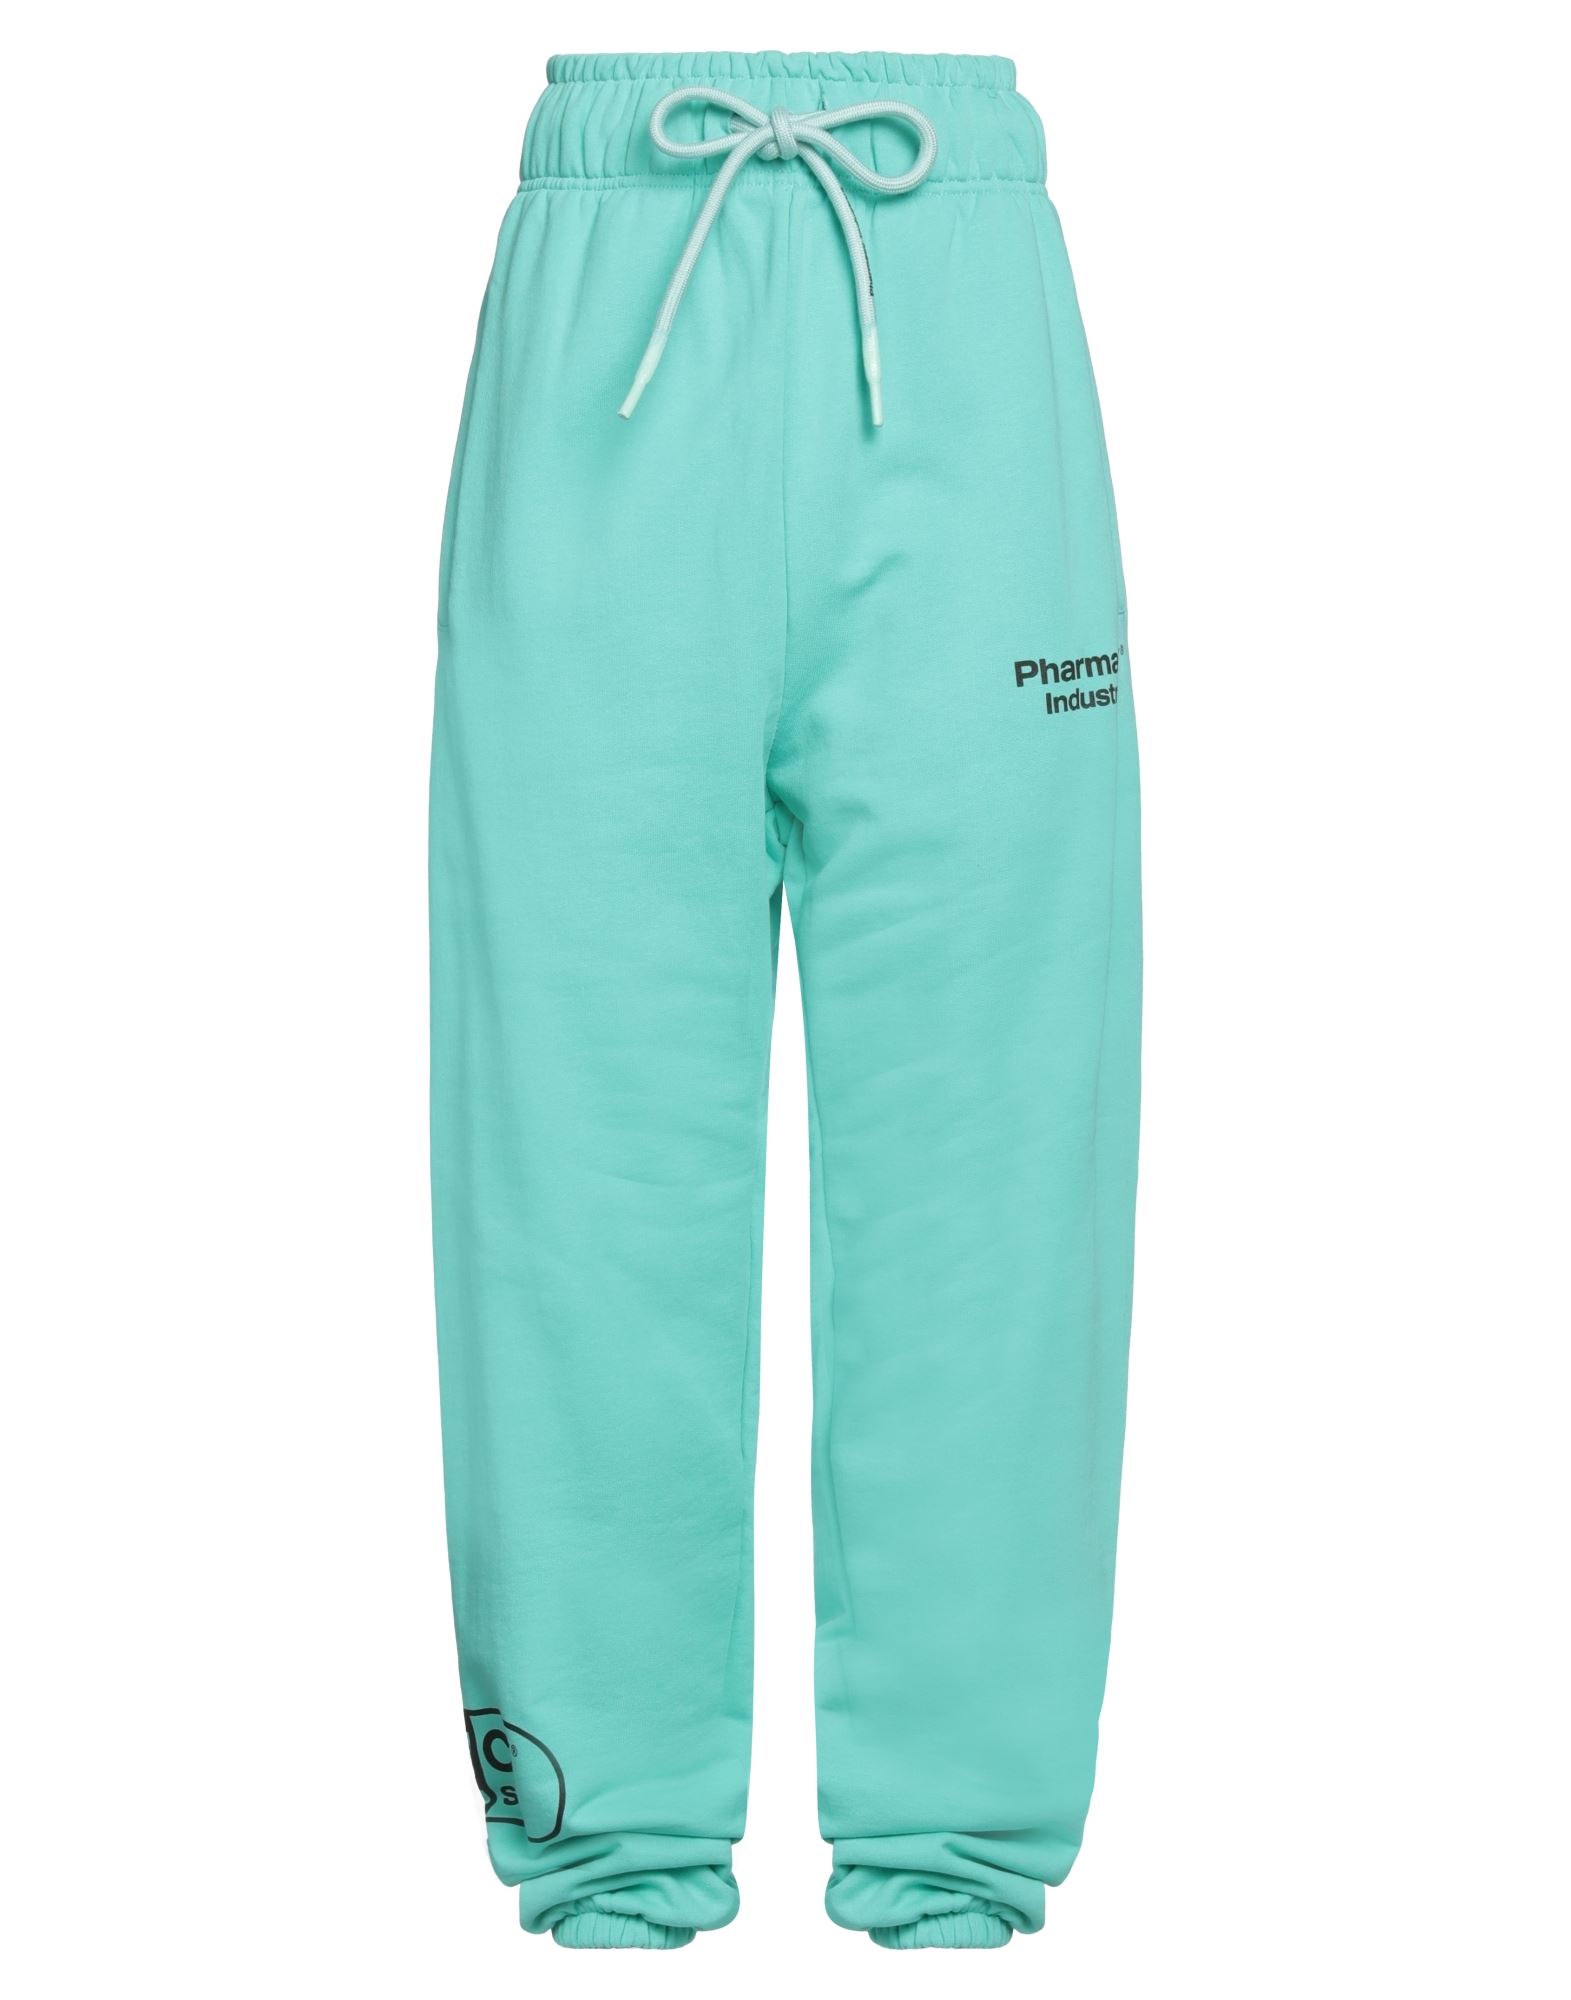 Pharmacy Industry Pants In Turquoise